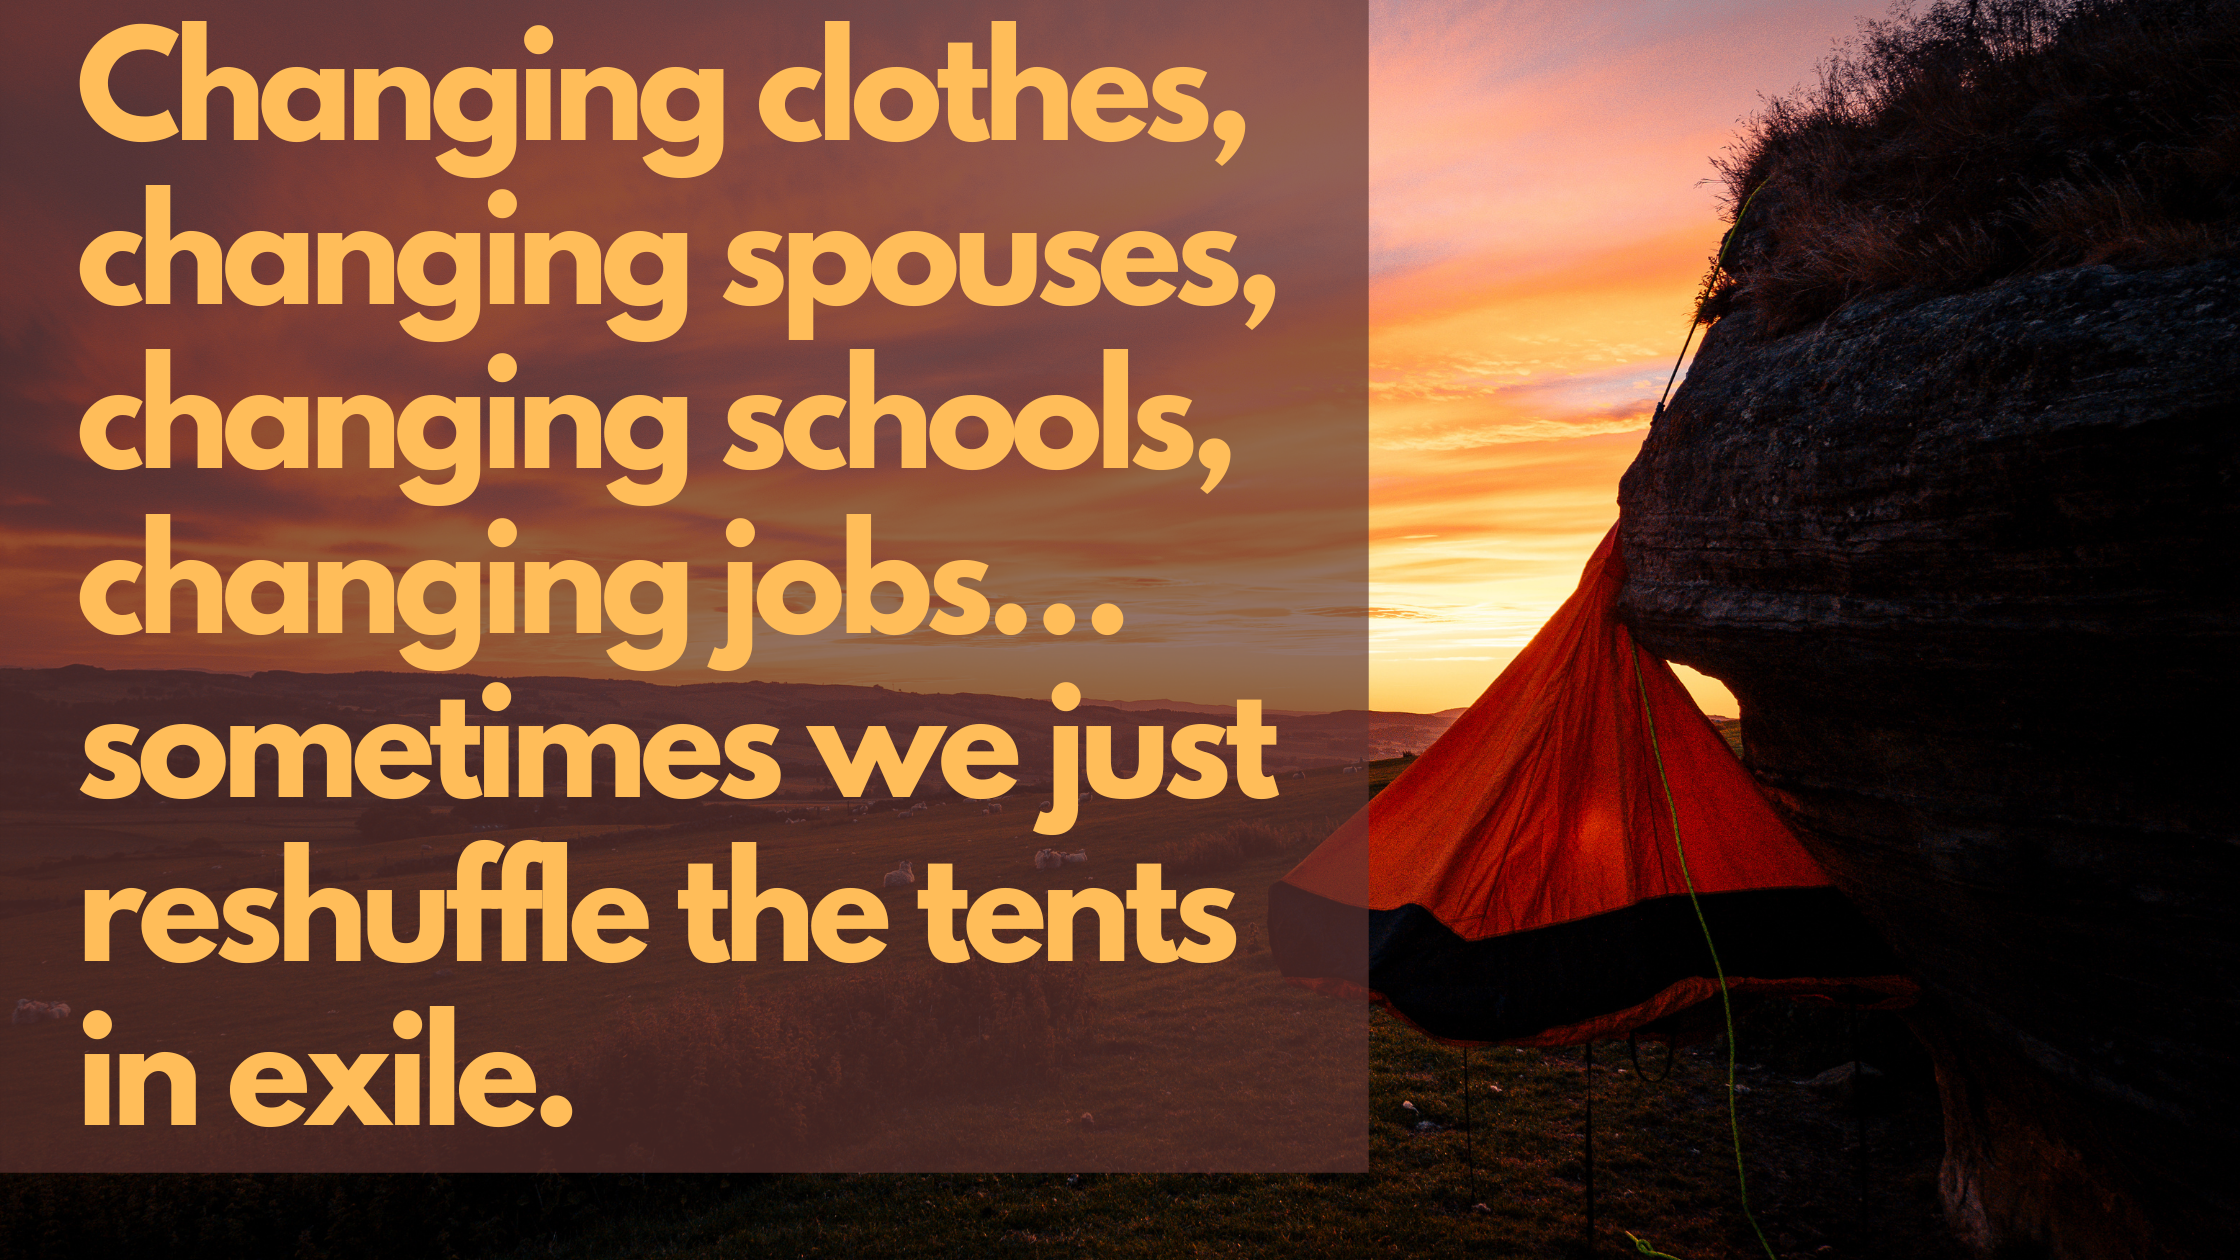 Changing clothes, changing spouses, changing schools, changing jobs…sometimes we just reshuffle the tents in exile.